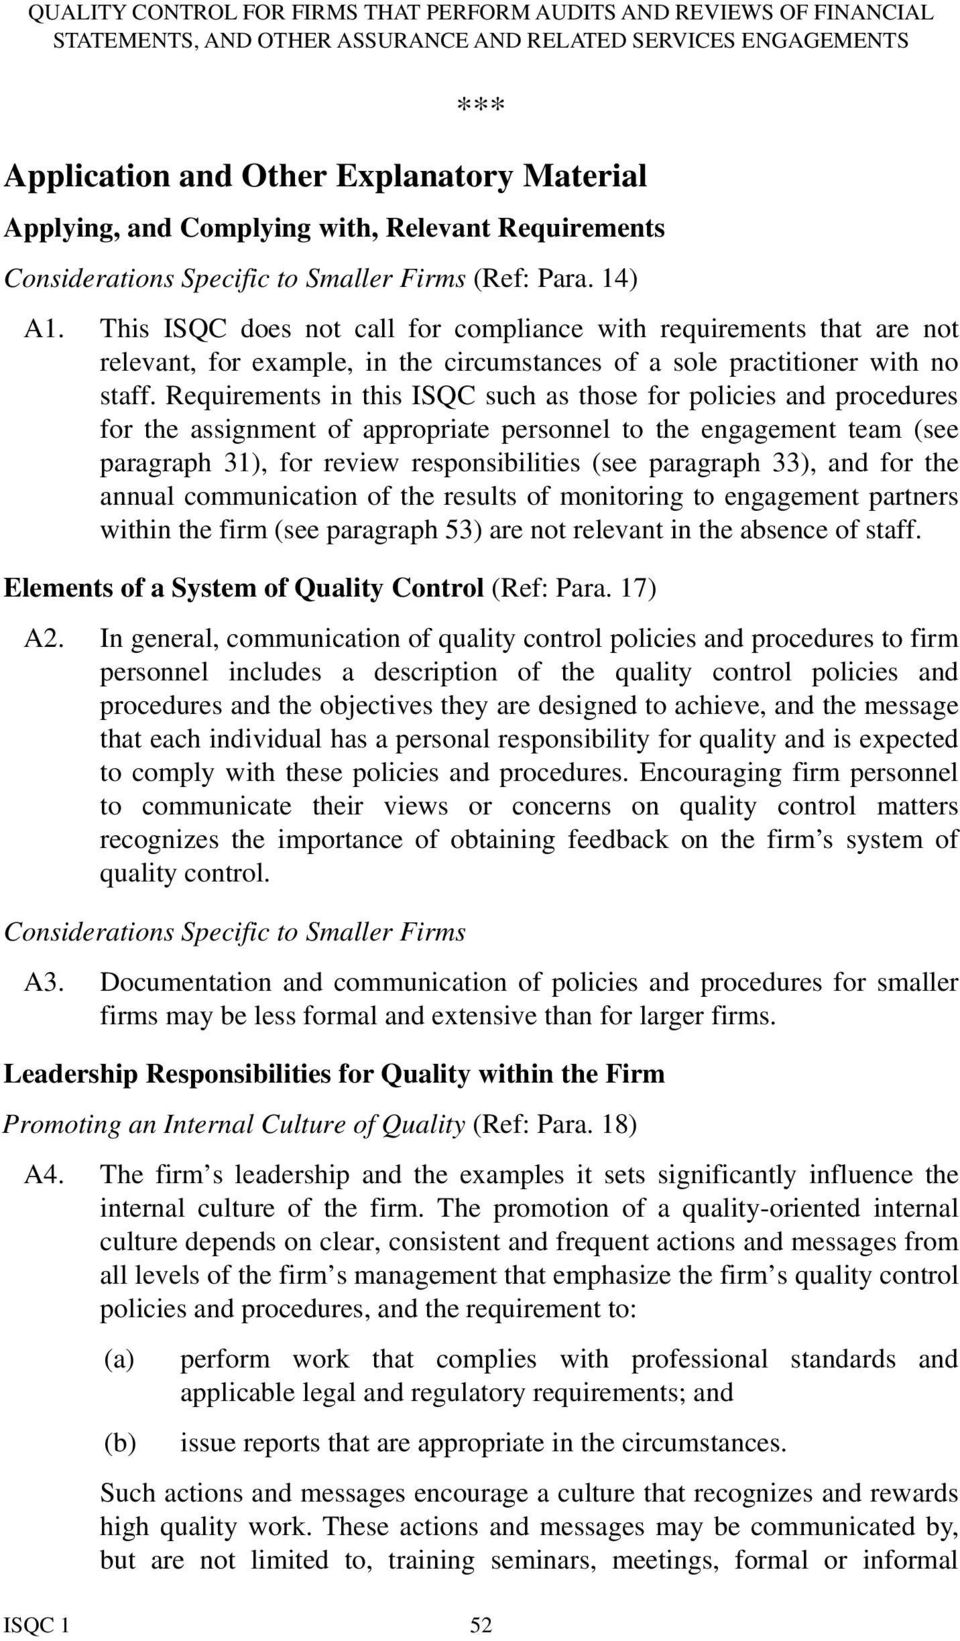 Requirements in this ISQC such as those for policies and procedures for the assignment of appropriate personnel to the engagement team (see paragraph 31), for review responsibilities (see paragraph